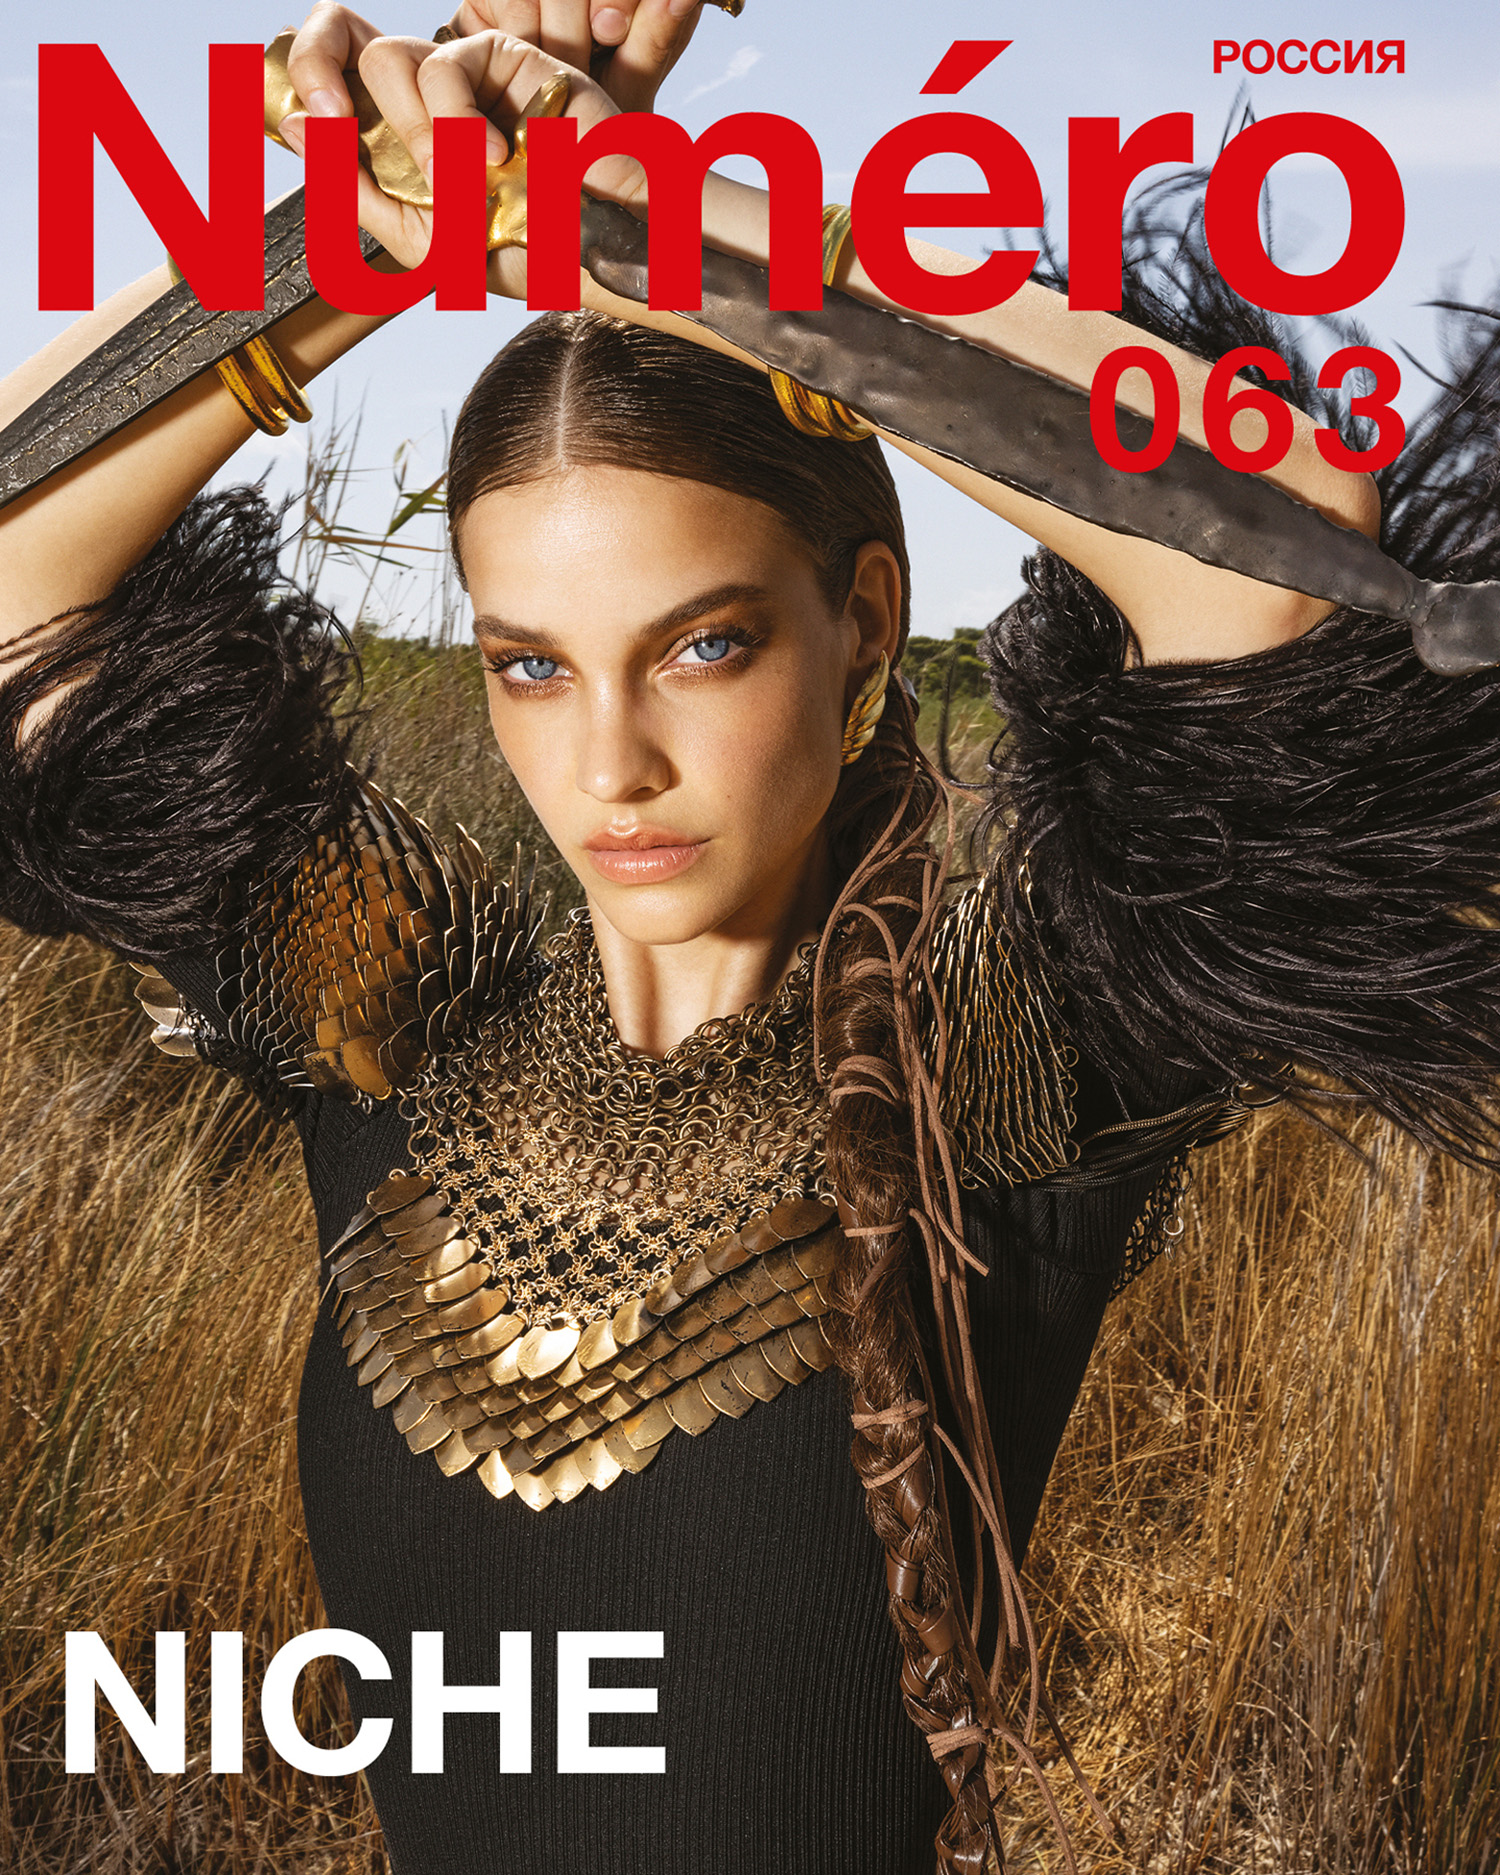 Barbara Palvin covers Numéro Russia Issue 063 by George Livieratos